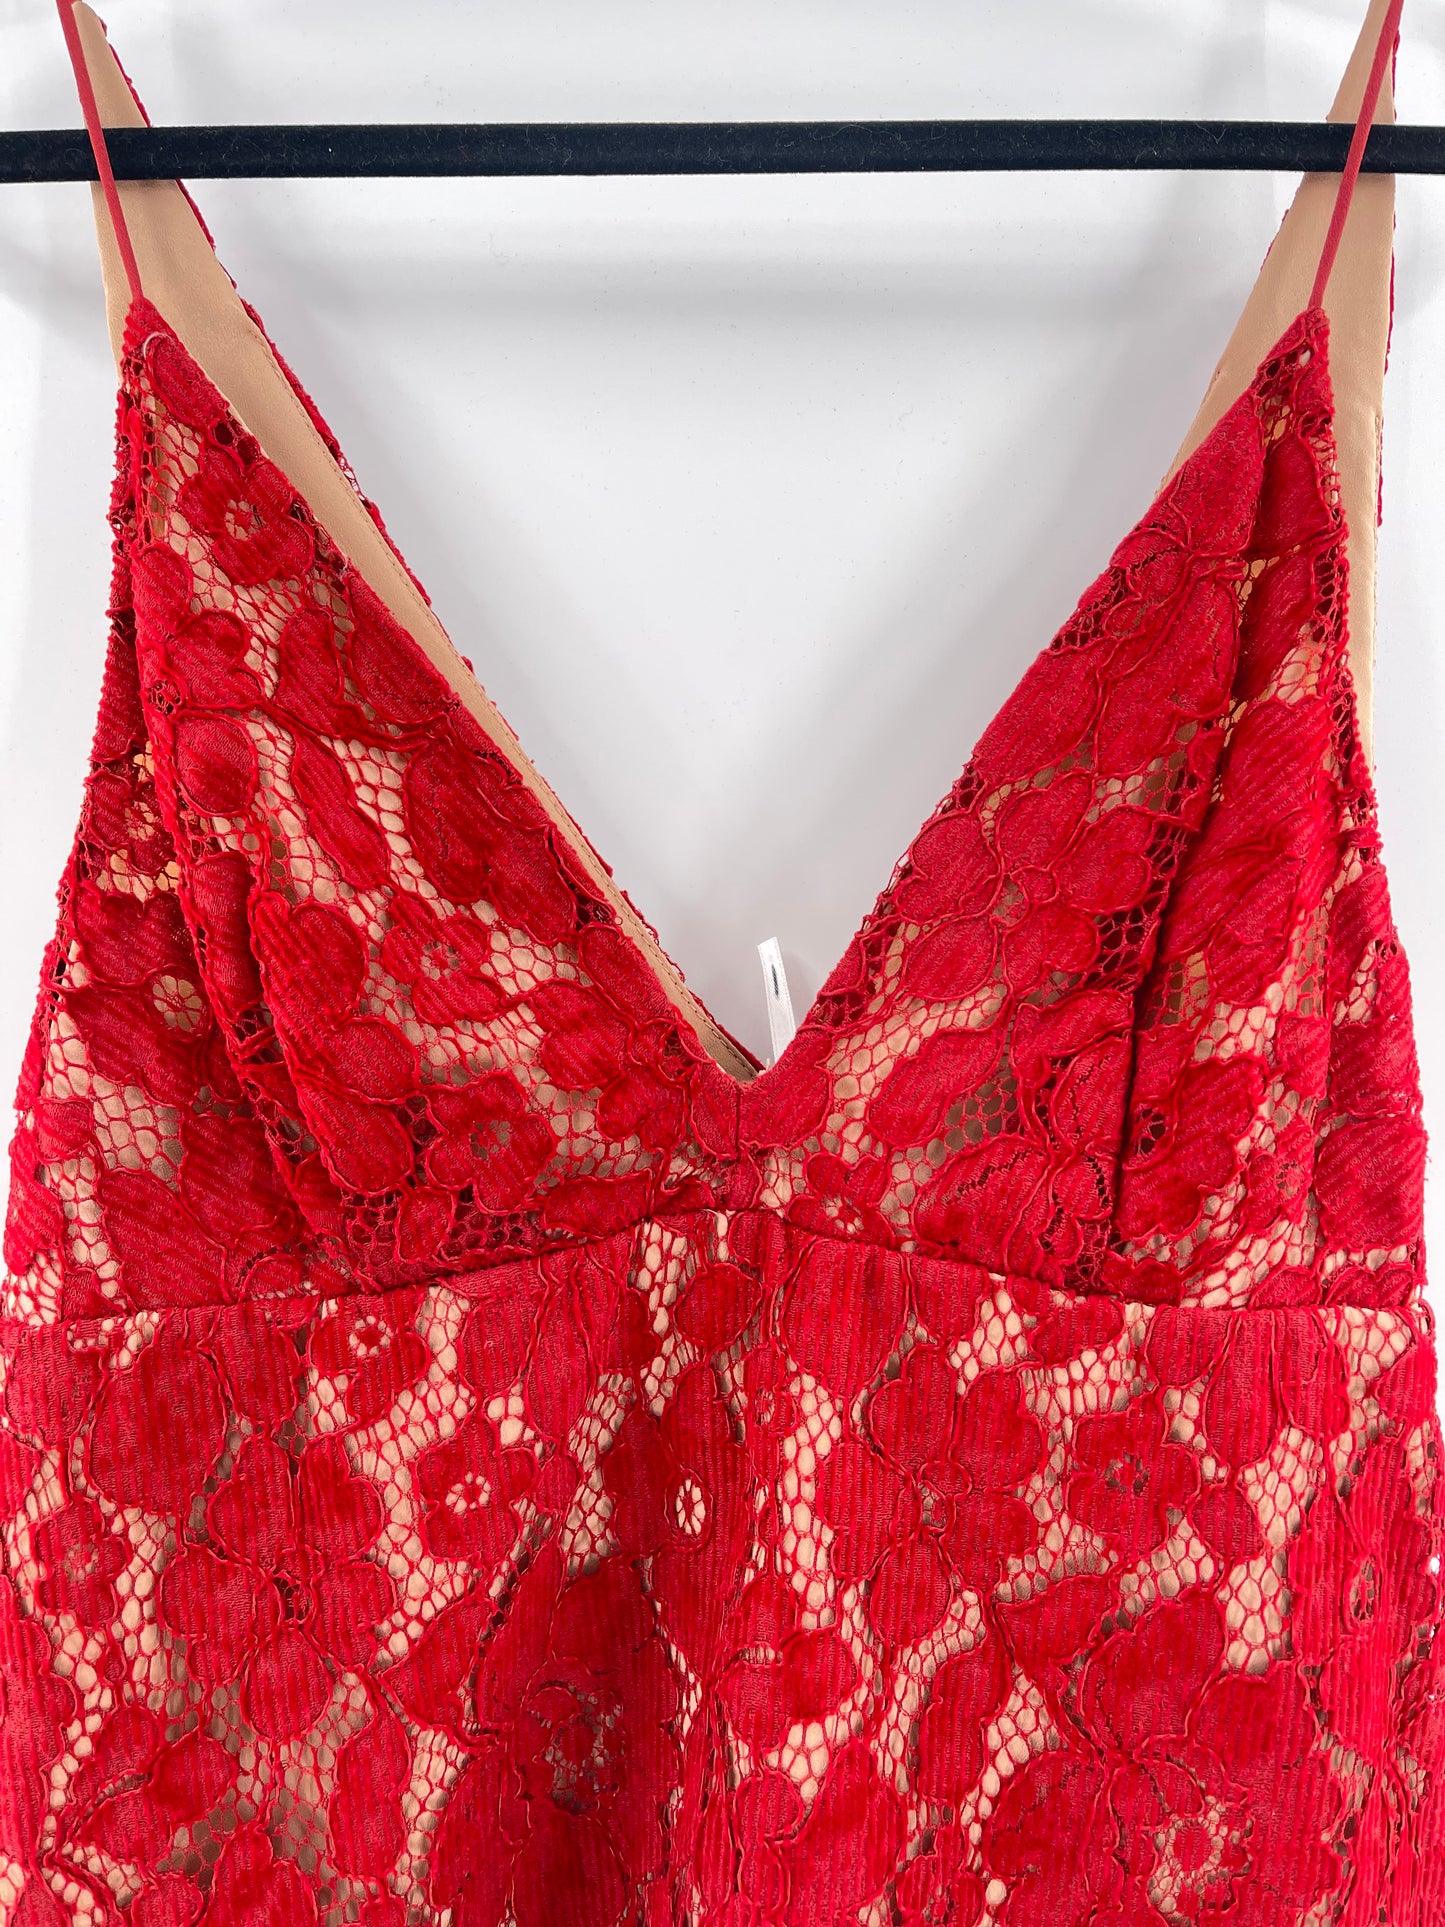 Free People Red Corduroy Lace Over Nude Underlay Sleeveless Mini Dress (Size 6)